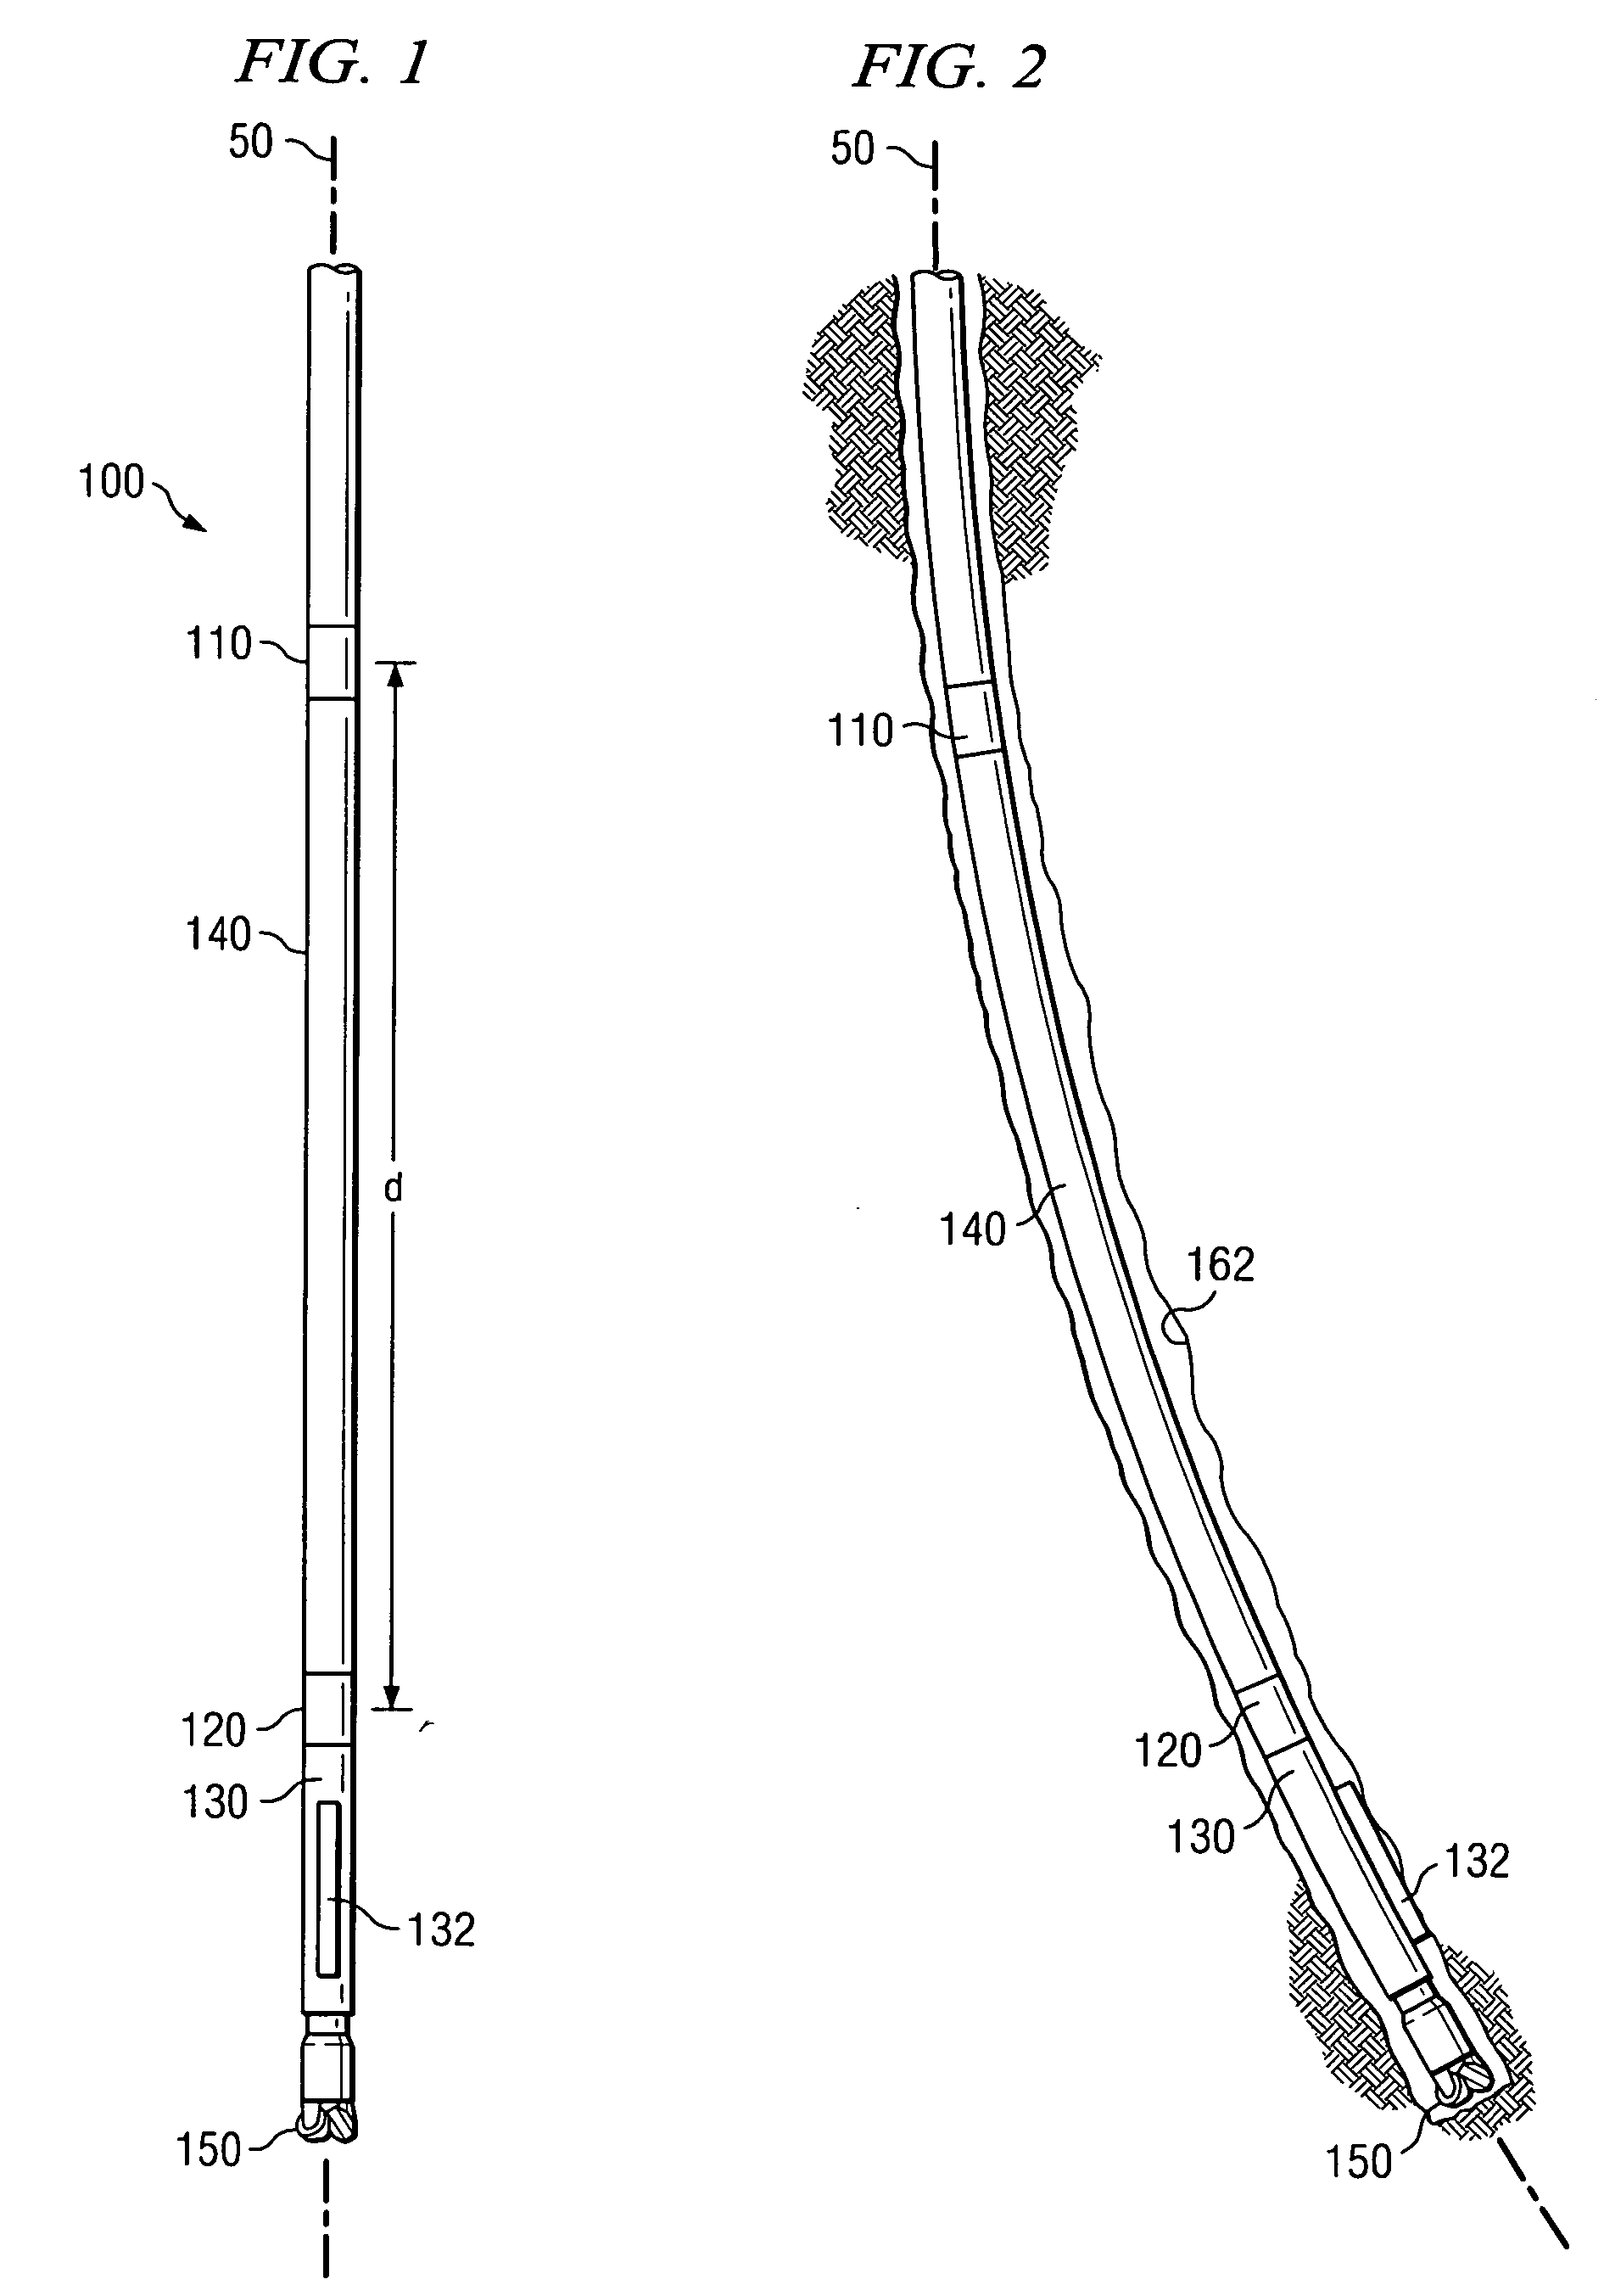 Control method for downhole steering tool